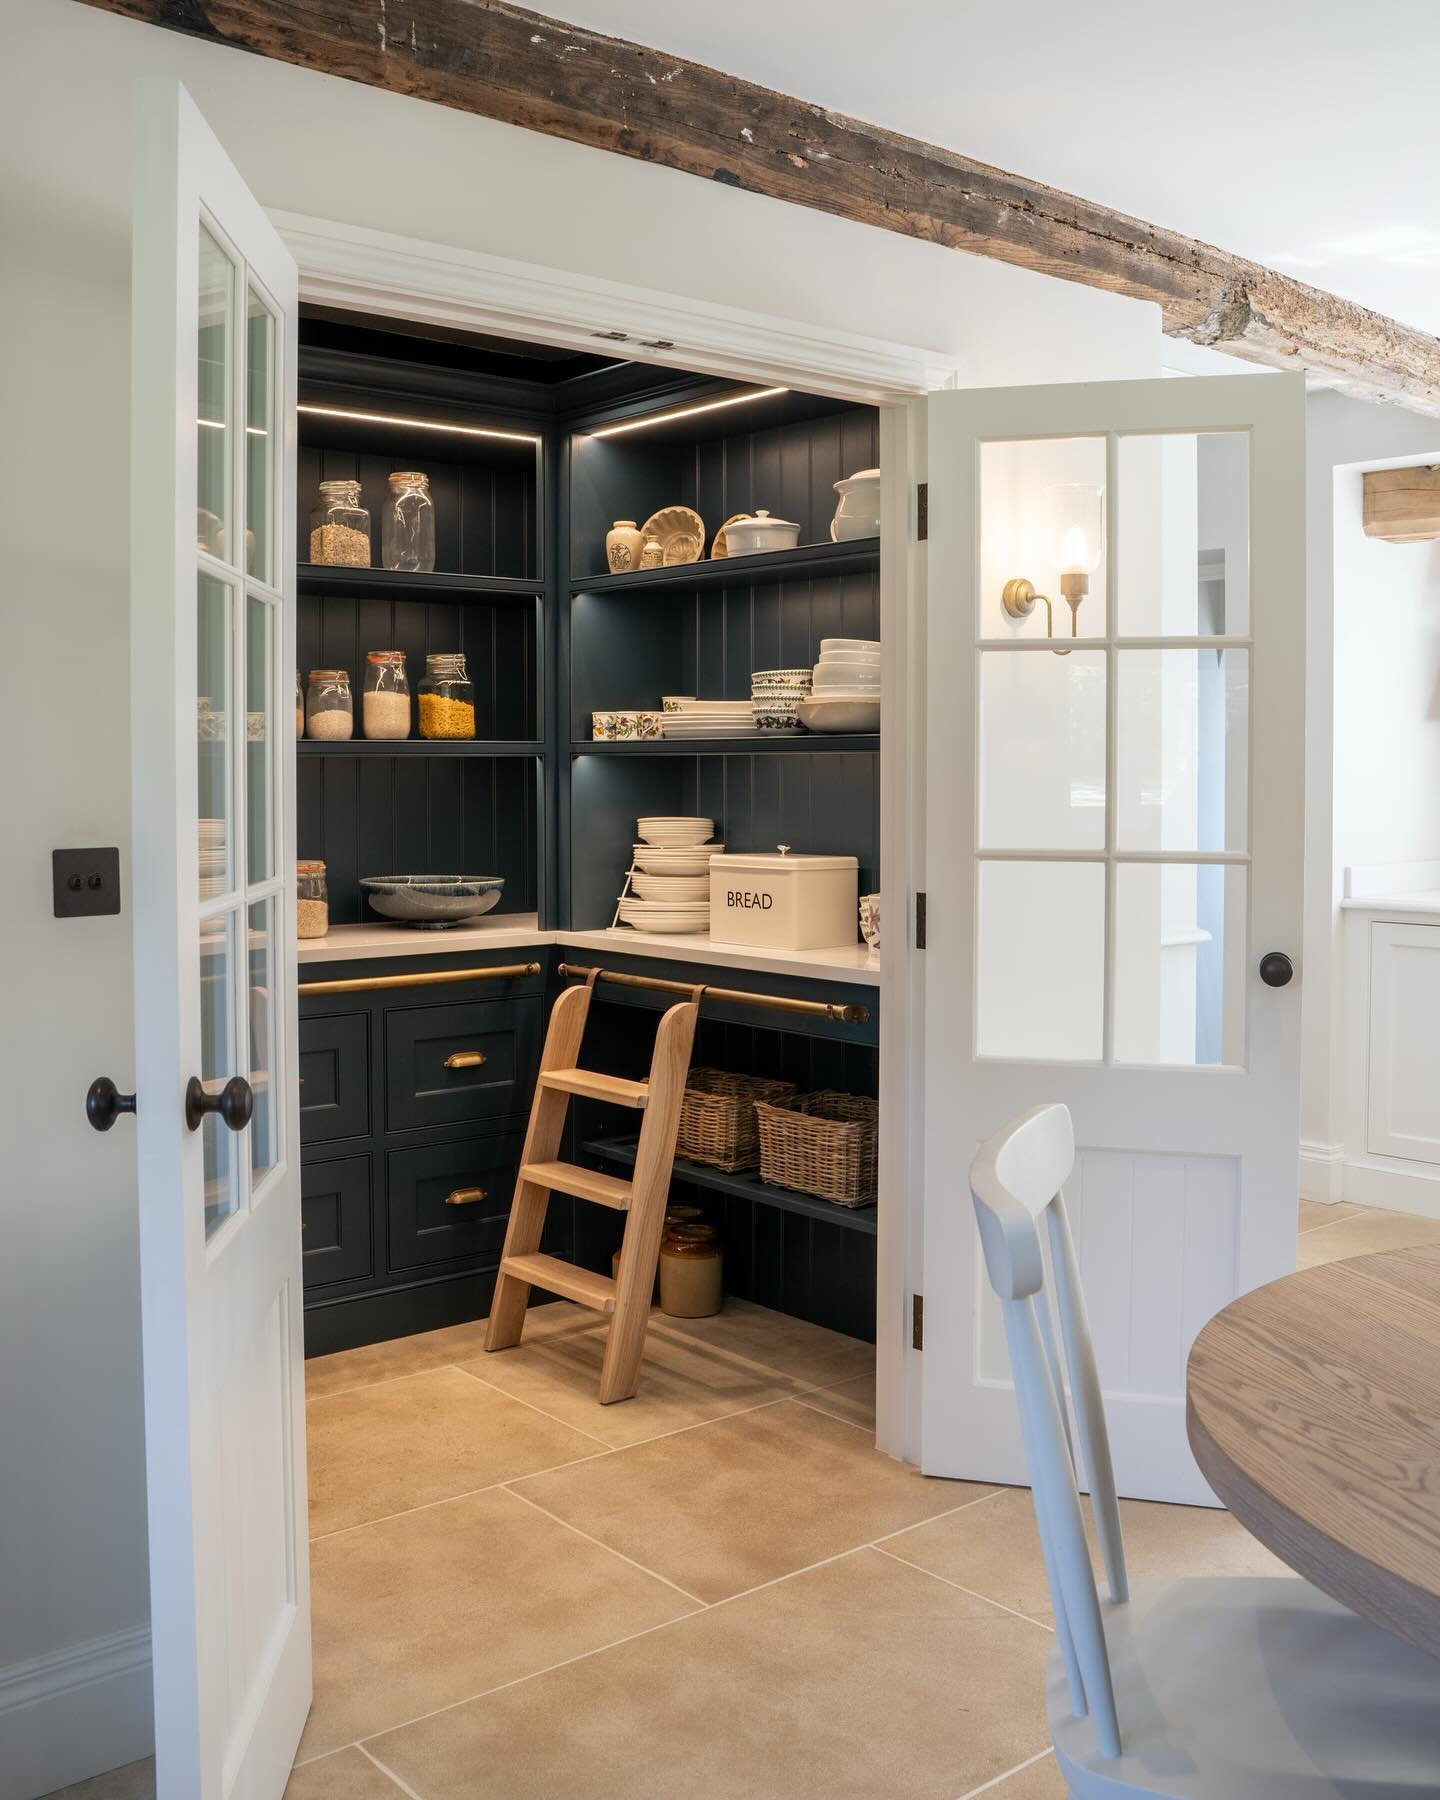 A few images from the walk in Pantry we designed at our Foxhall Hall full property renovation. We removed a large unusable kitchen chimney stack central to the property and placed the pantry central here utilising the cooler space and central positio